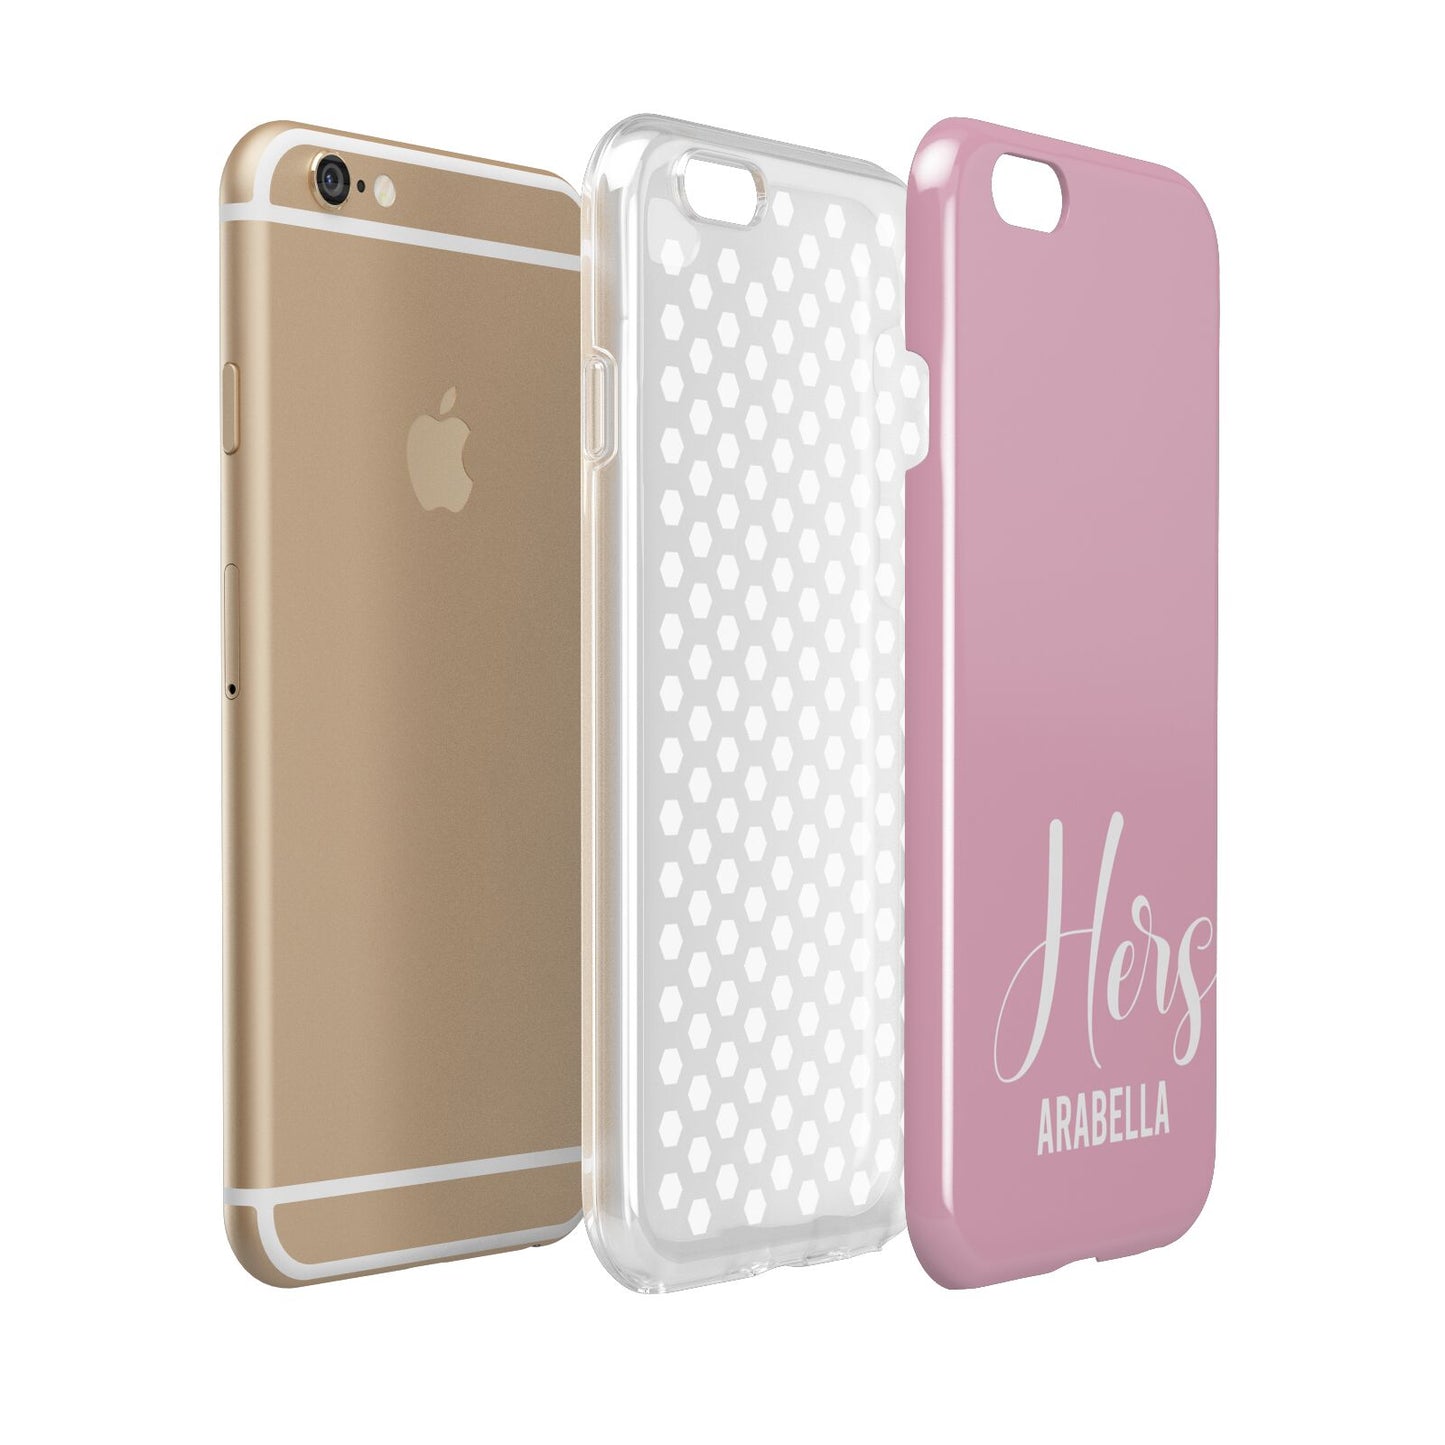 His or Hers Personalised Apple iPhone 6 3D Tough Case Expanded view